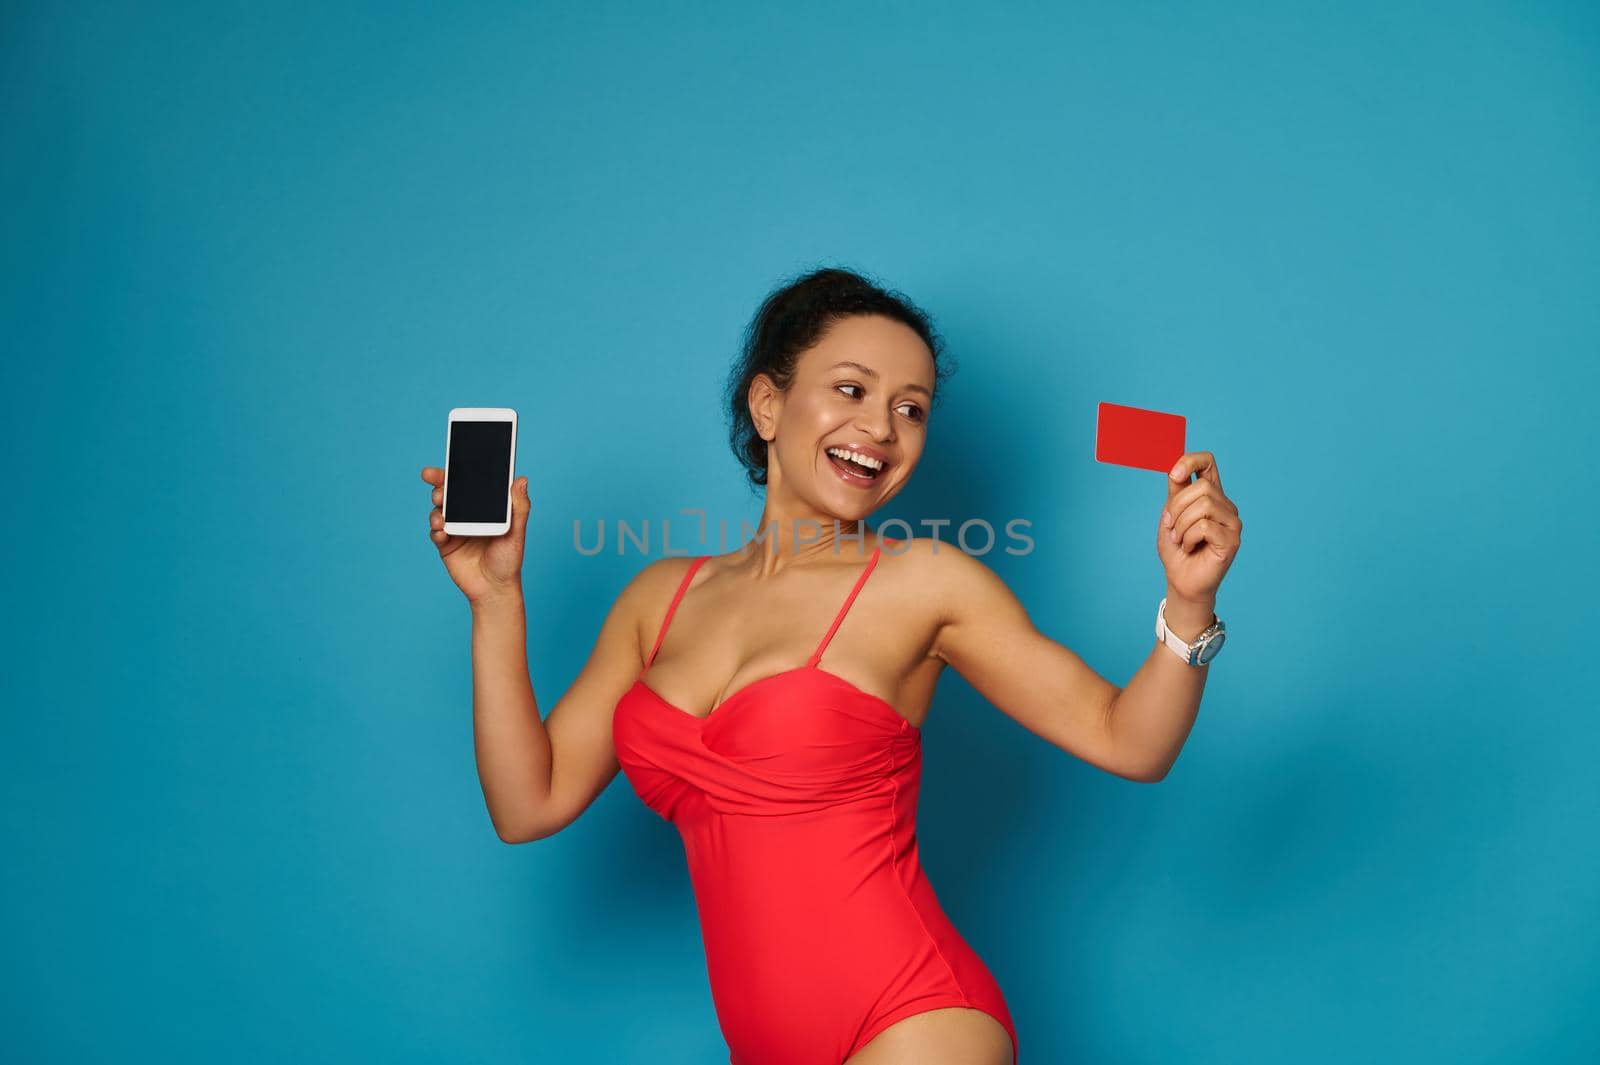 Attractive young woman in red swim suit holding a cell phone i her hand and looking at a red blank plastic card in her other hand, isolated over blue background with copy space